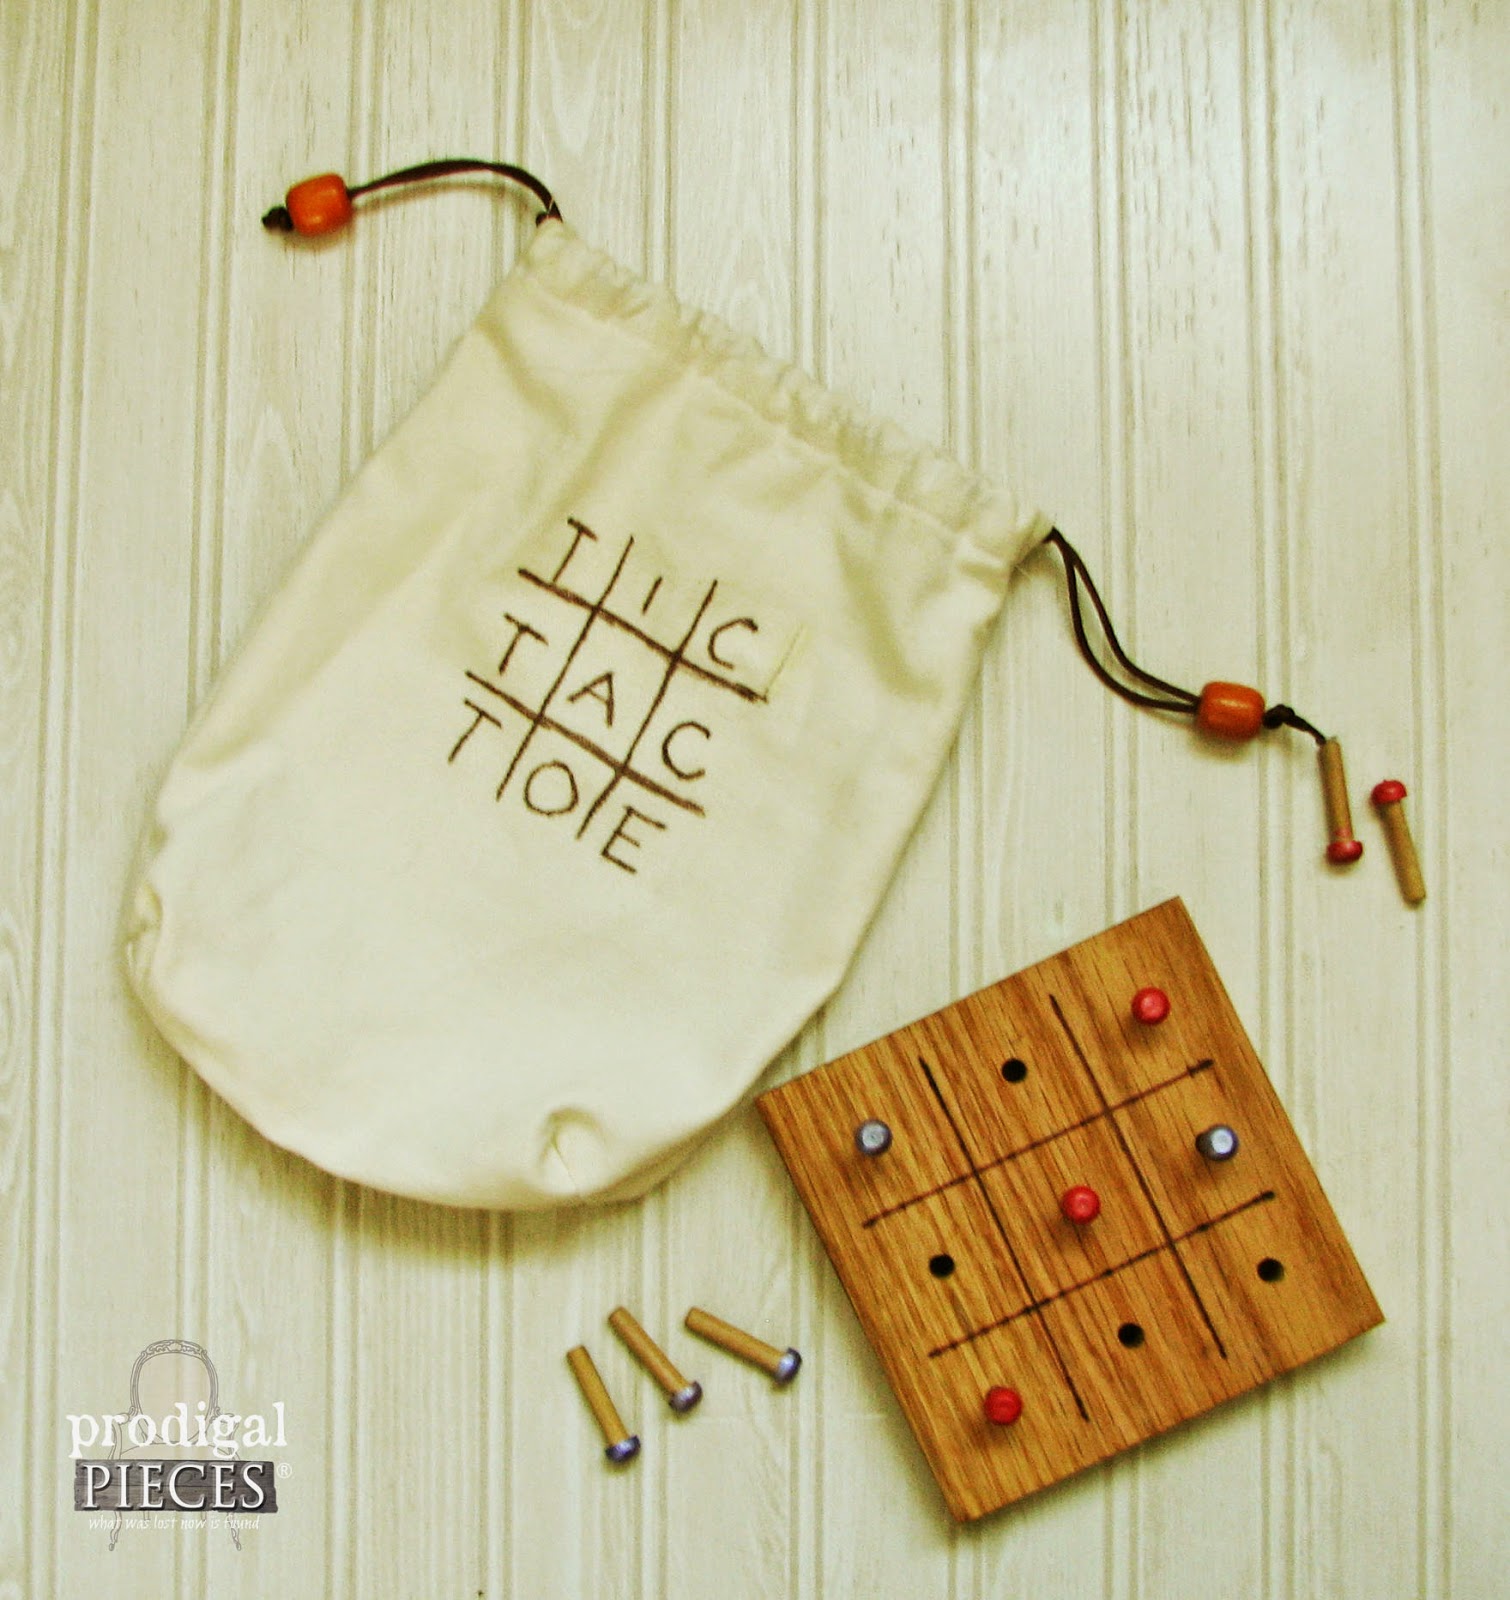 Handmade Holidays #3 Wooden Tic Tac Toe Travel Game by Larissa of Prodigal Pieces | prodigalpieces.com